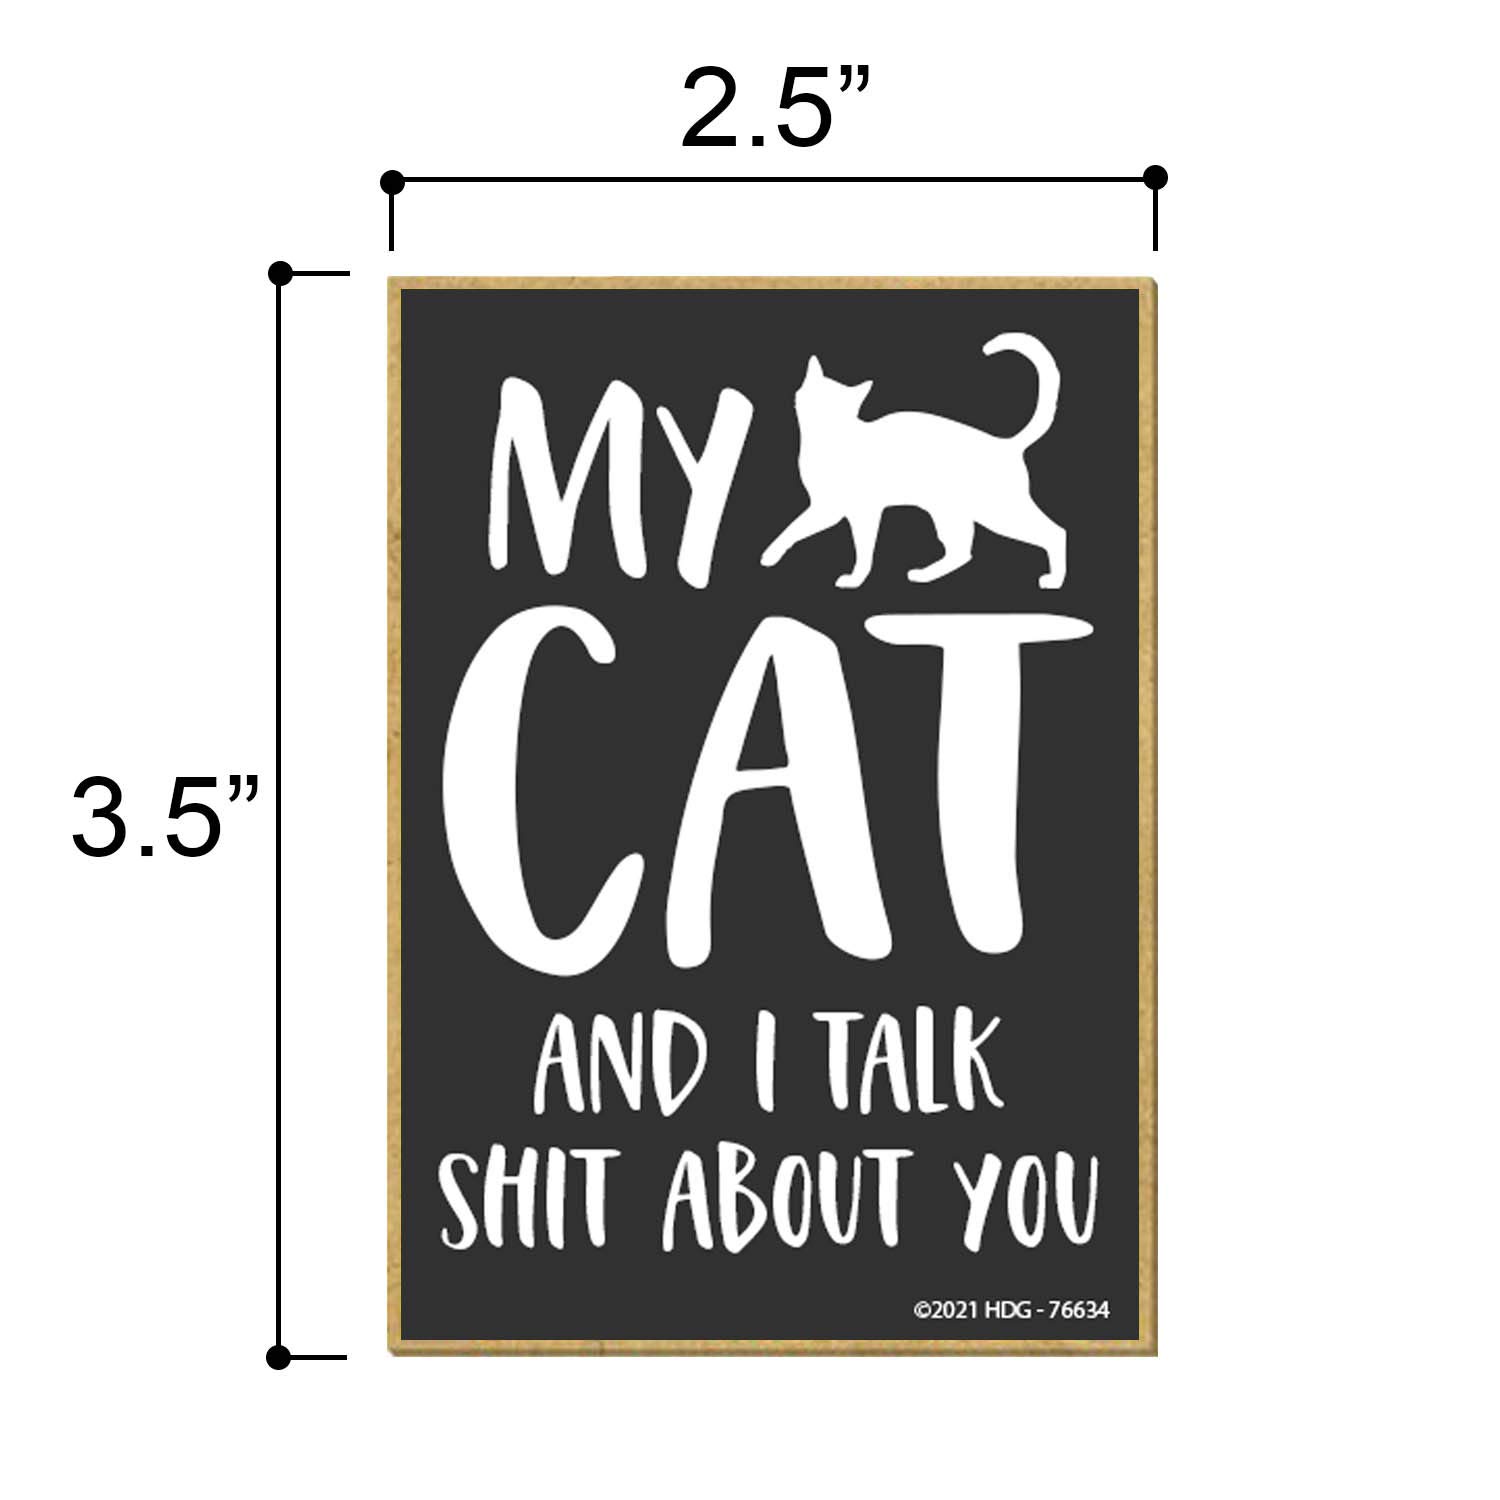 Honey Dew Gifts, My Cat and I Talk Shit About You, Funny Cat Fridge Magnets, Cat Themed Gifts for Women, Refrigerator Magnet, 2.5 Inches by 3.5 Inches